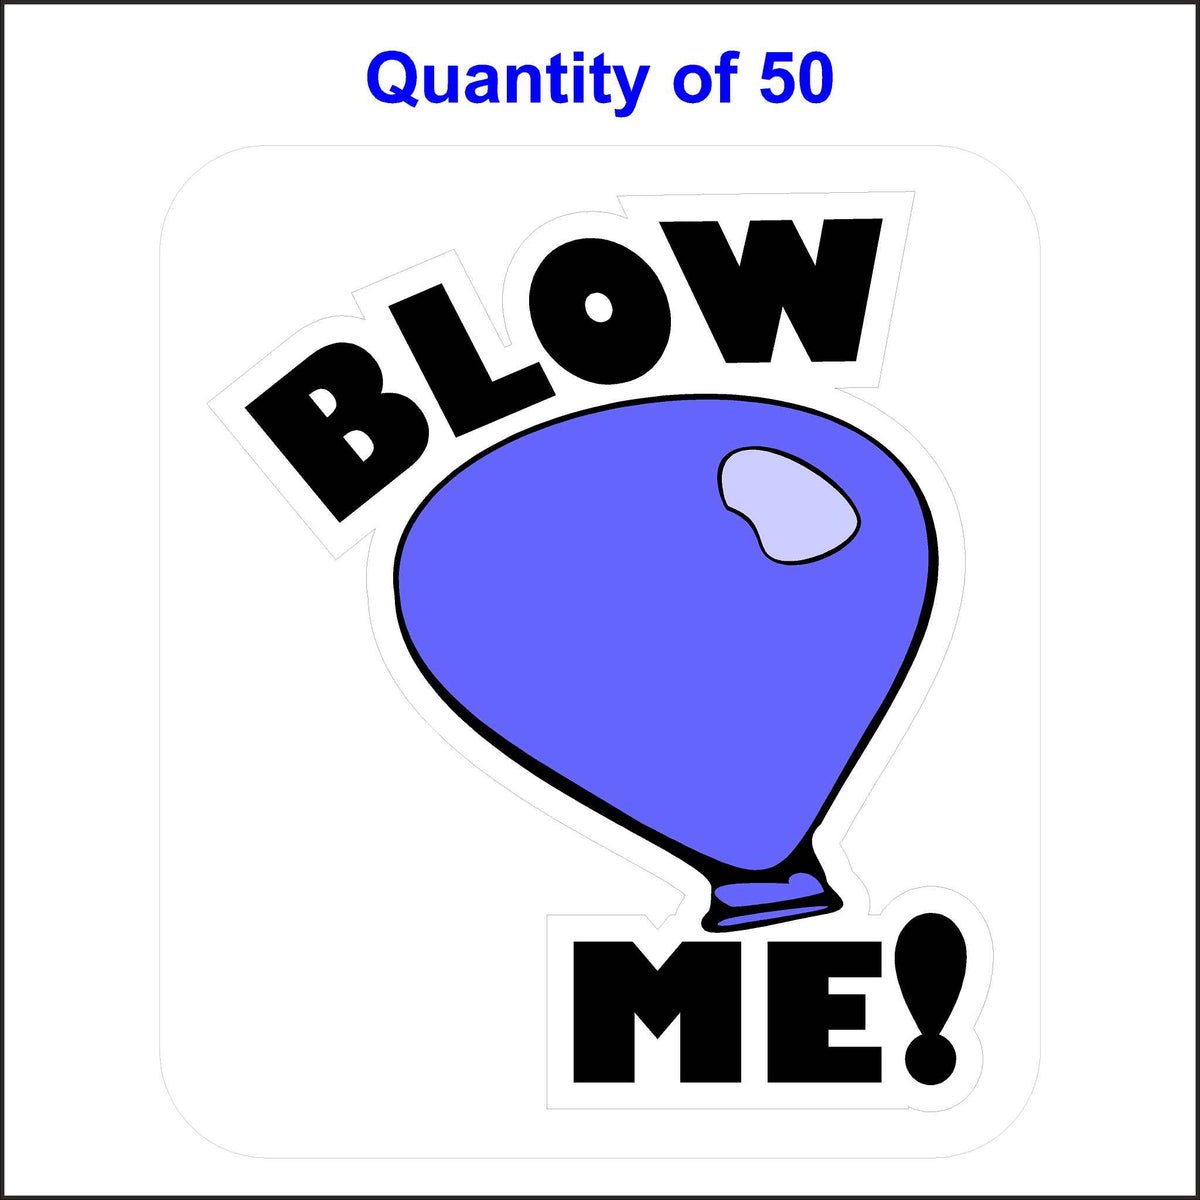 50 Blow Me Hard Hat Stickers. Printed in Black Are the Words Blow Me! They Wrap Around a Purple Balloon.